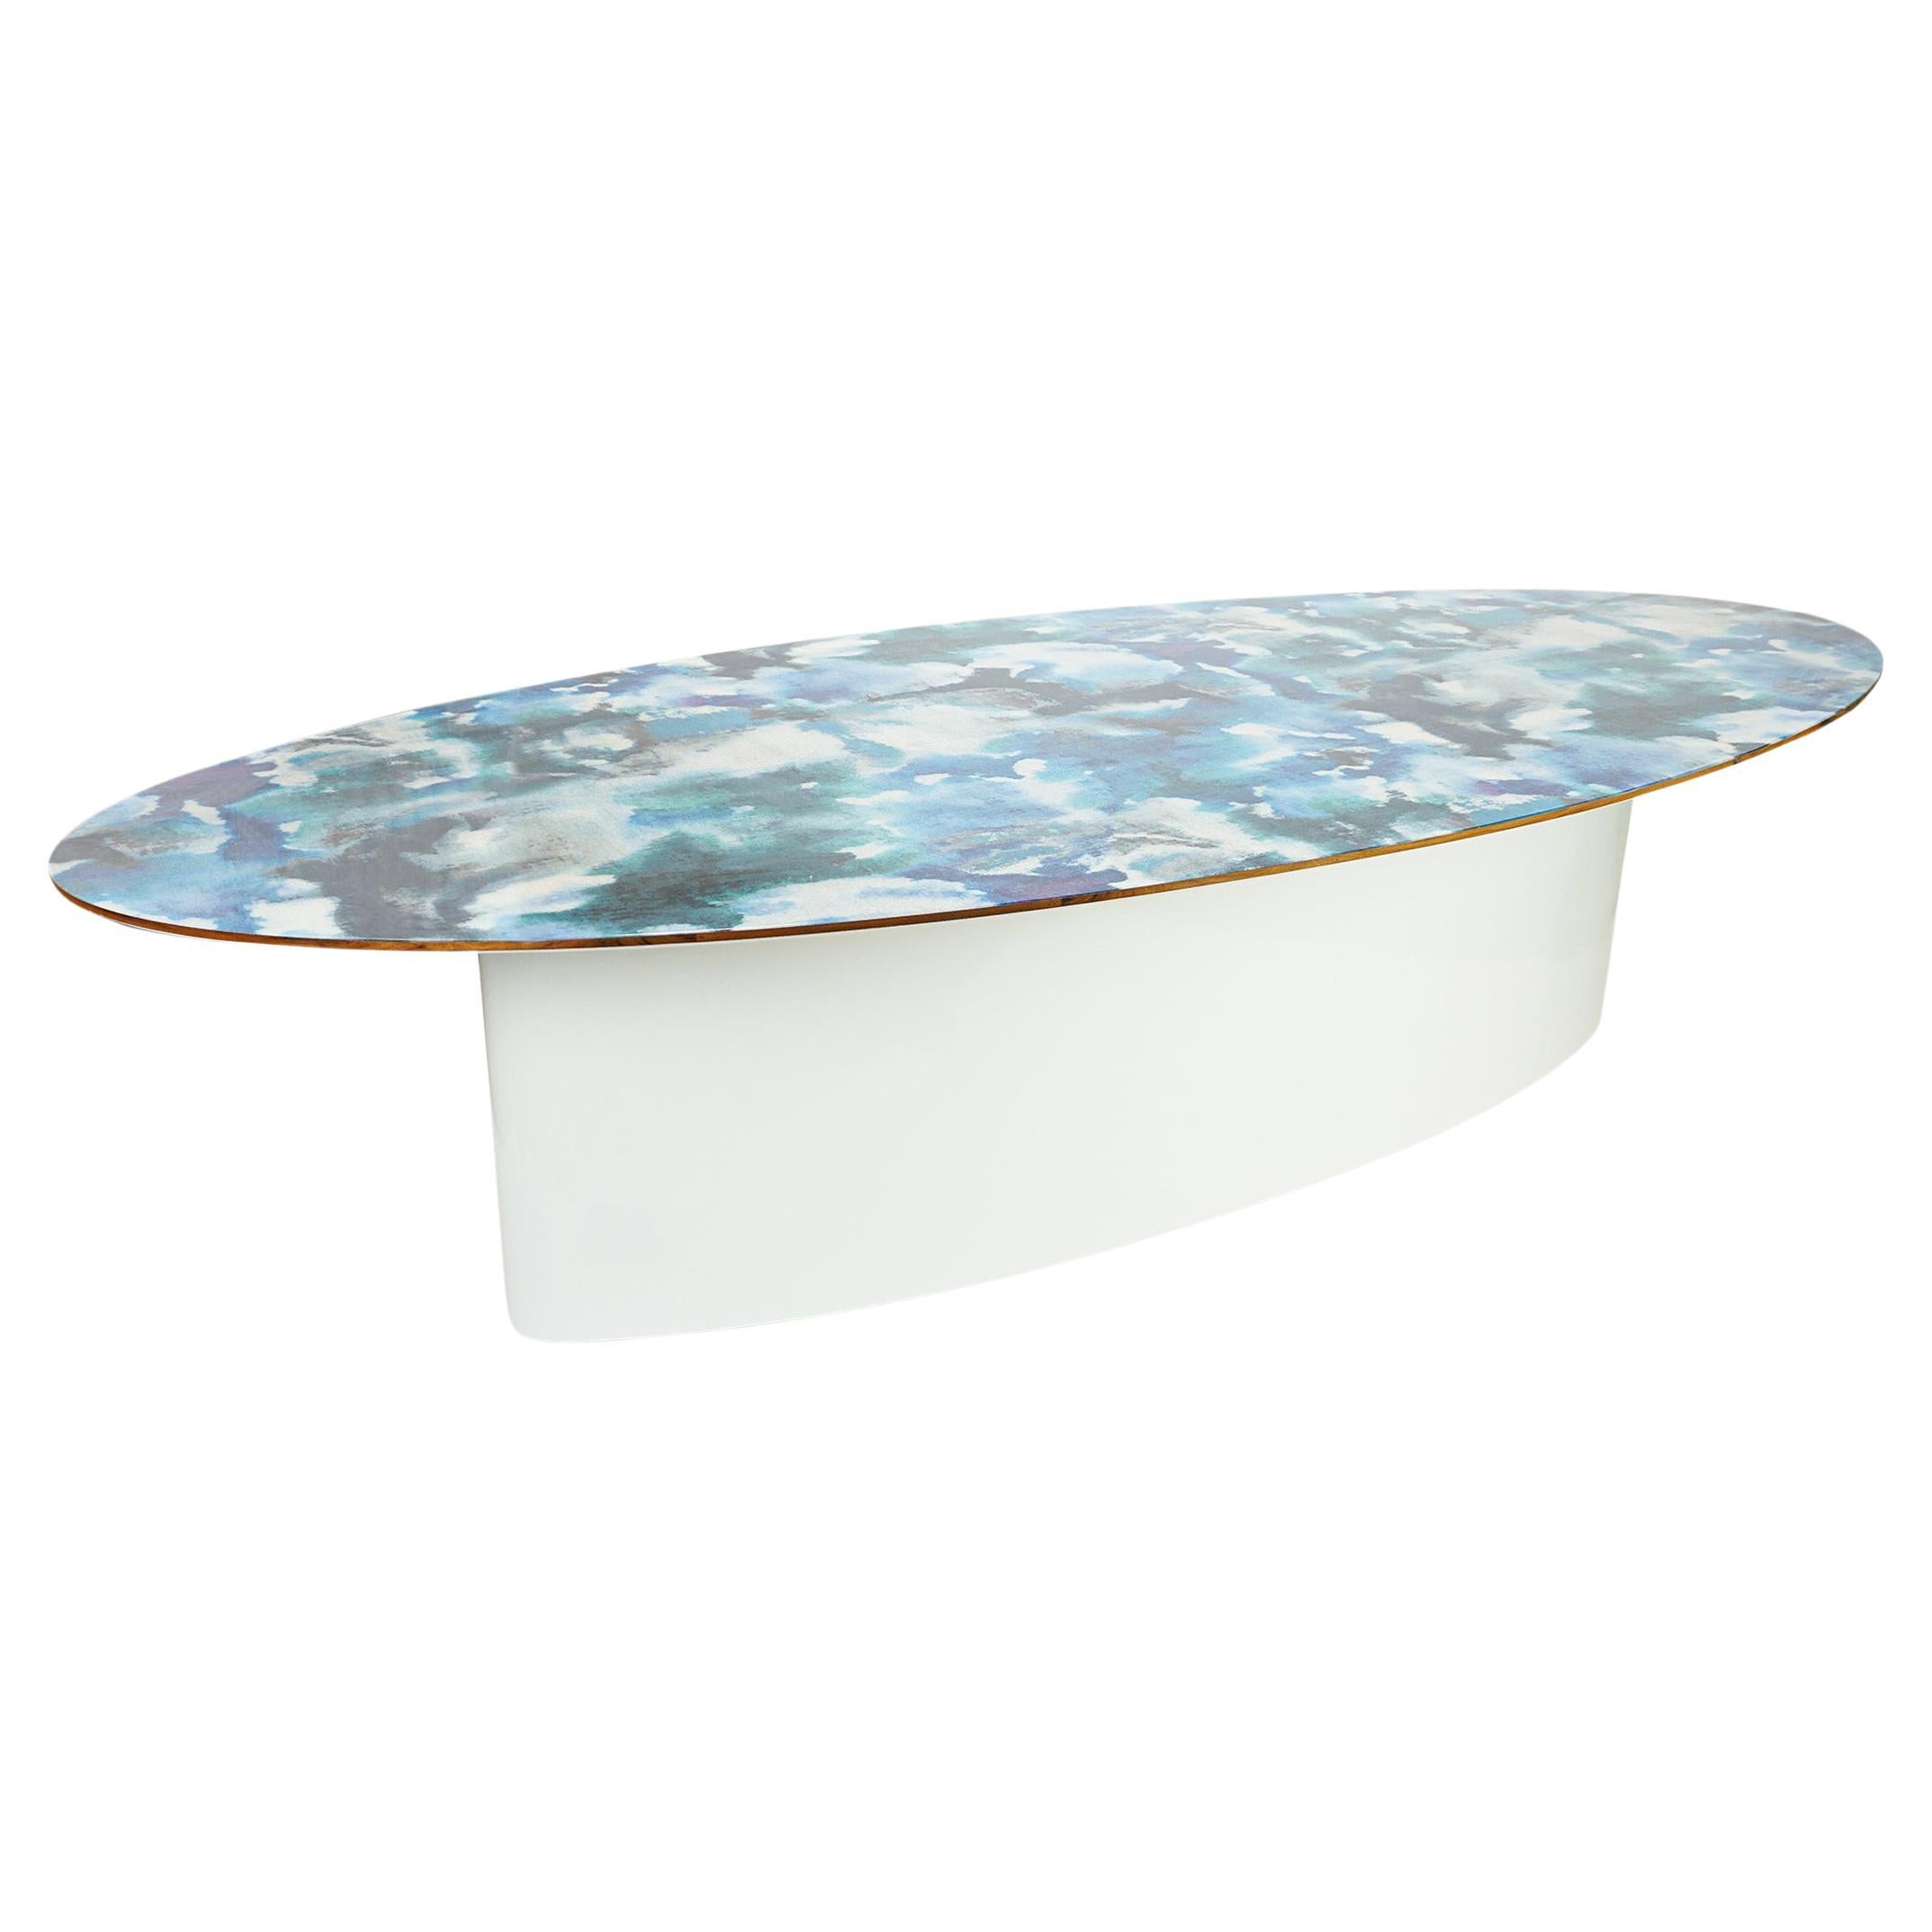 Ellipse Dining Table with Decorative Top Finished in Resin and Lacquered Base